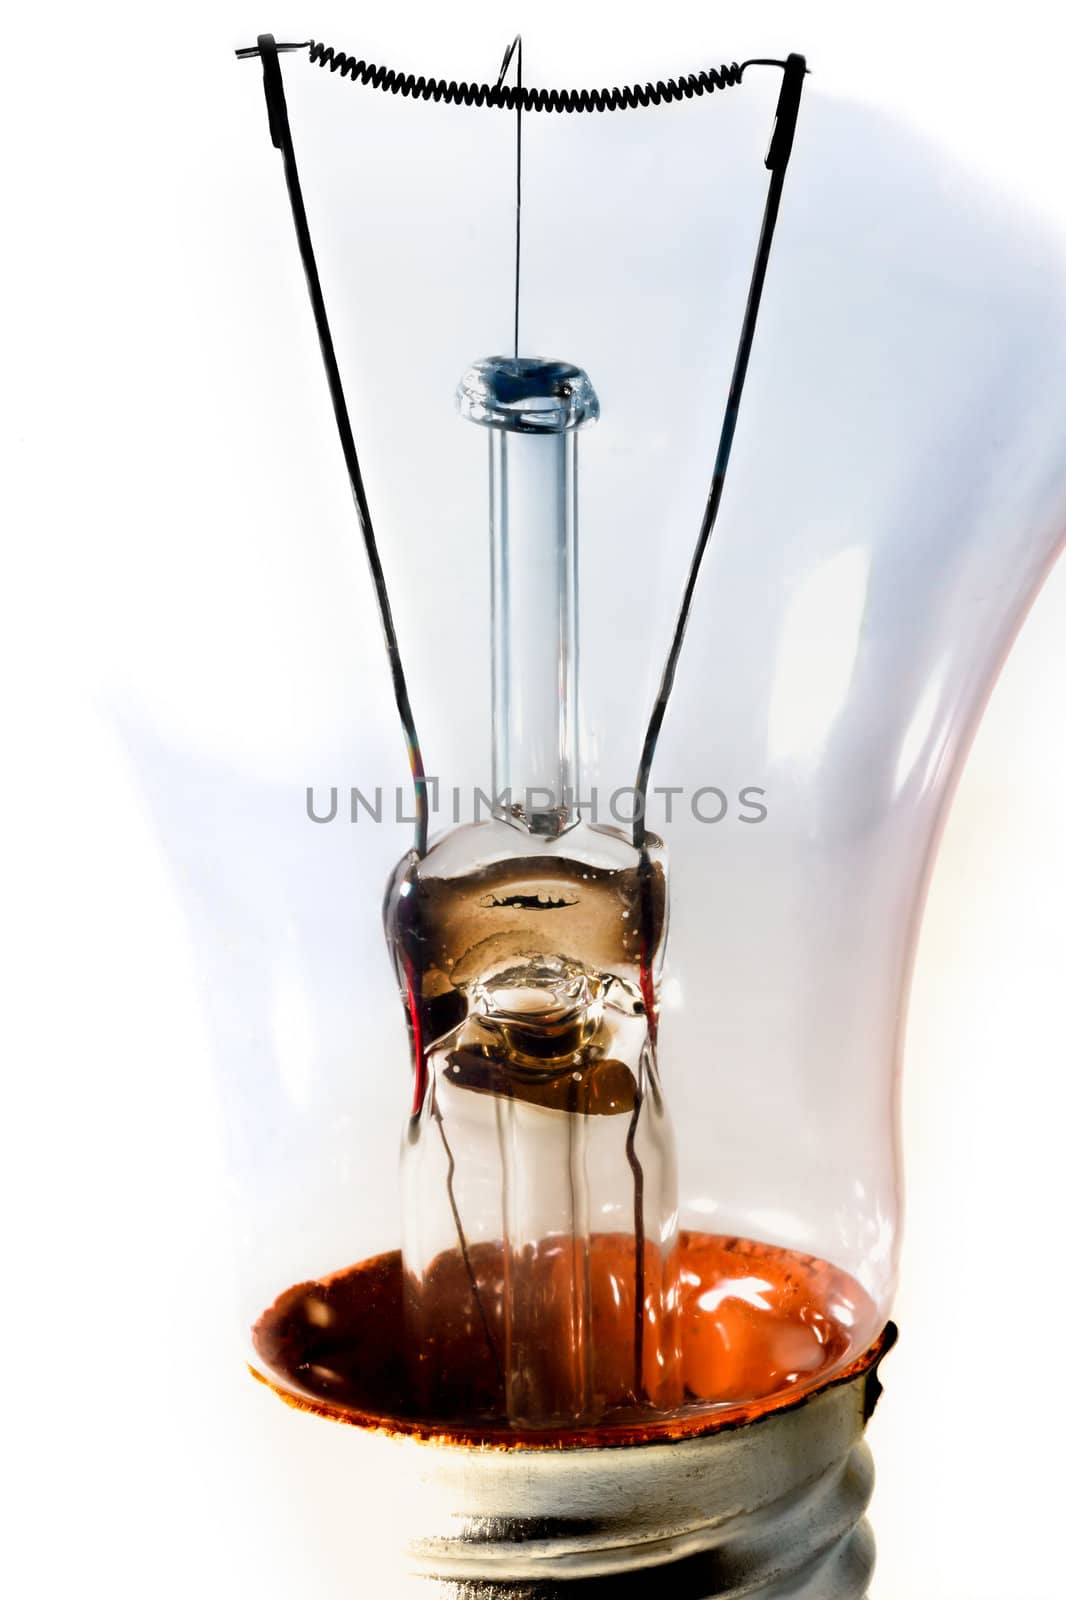 Clear Incandescent Light Bulb Isolated on White by wolterk